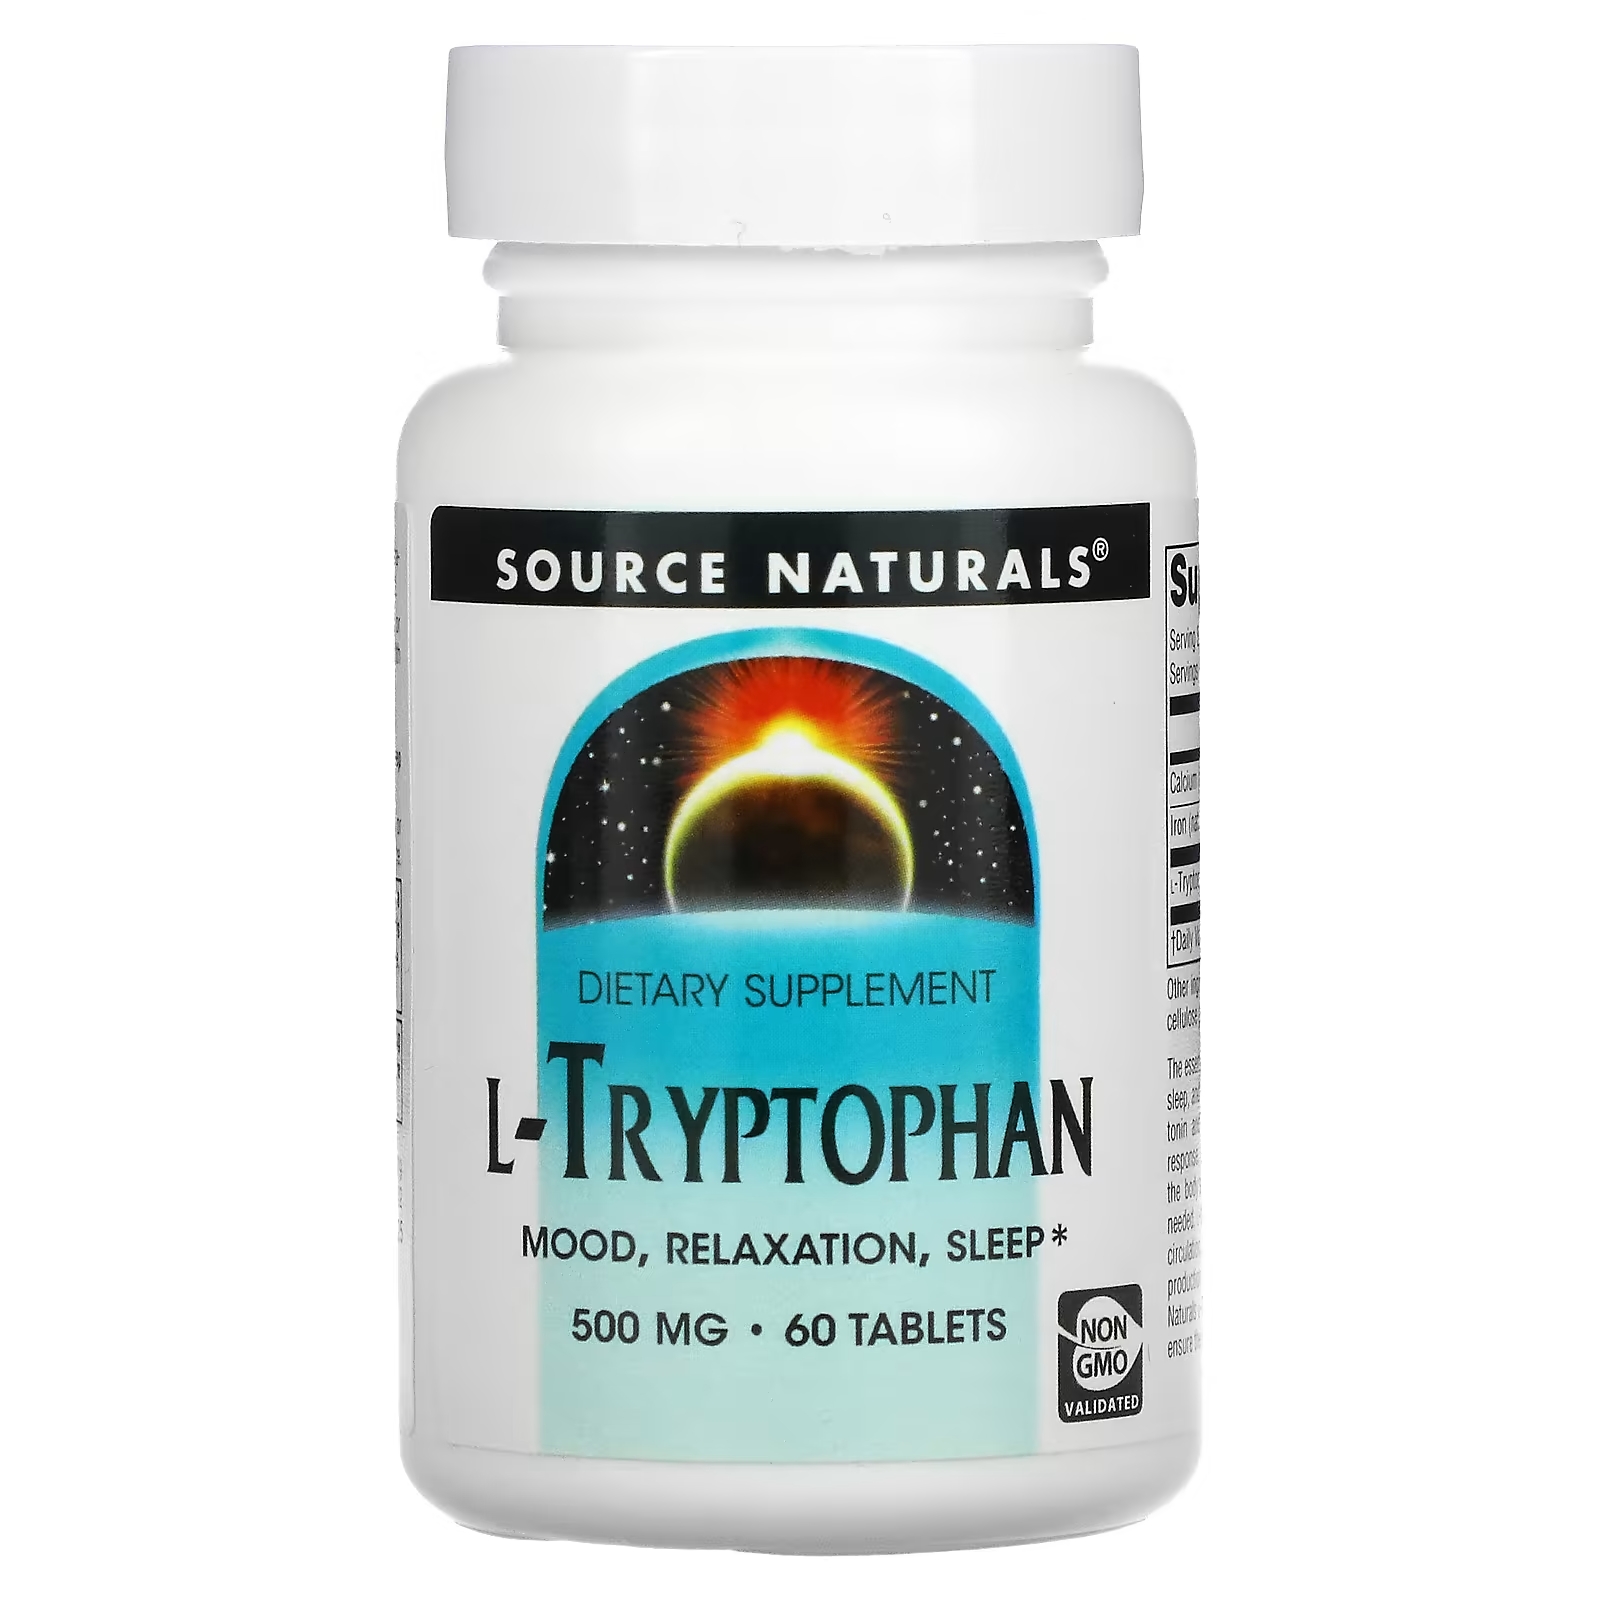 Source Naturals L-триптофан 500 мг, 60 таблеток source naturals athletic series инозин 500 мг 60 таблеток